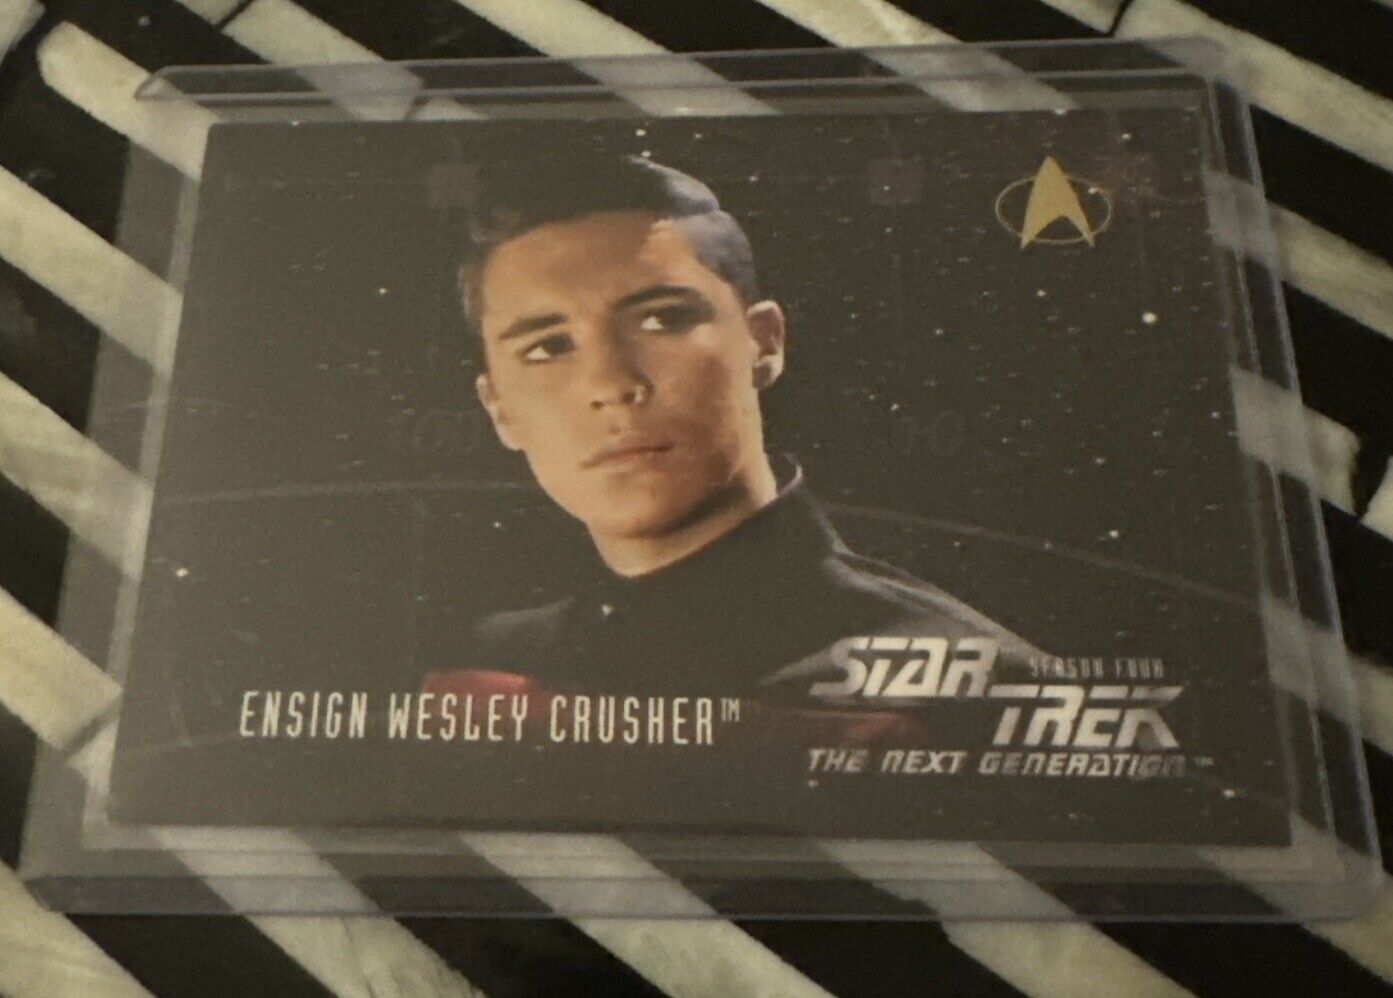 STAR TREK THE NEXT GENERATION TRADING CARD WESLEY CRUSHER / WILL WHEATON 417